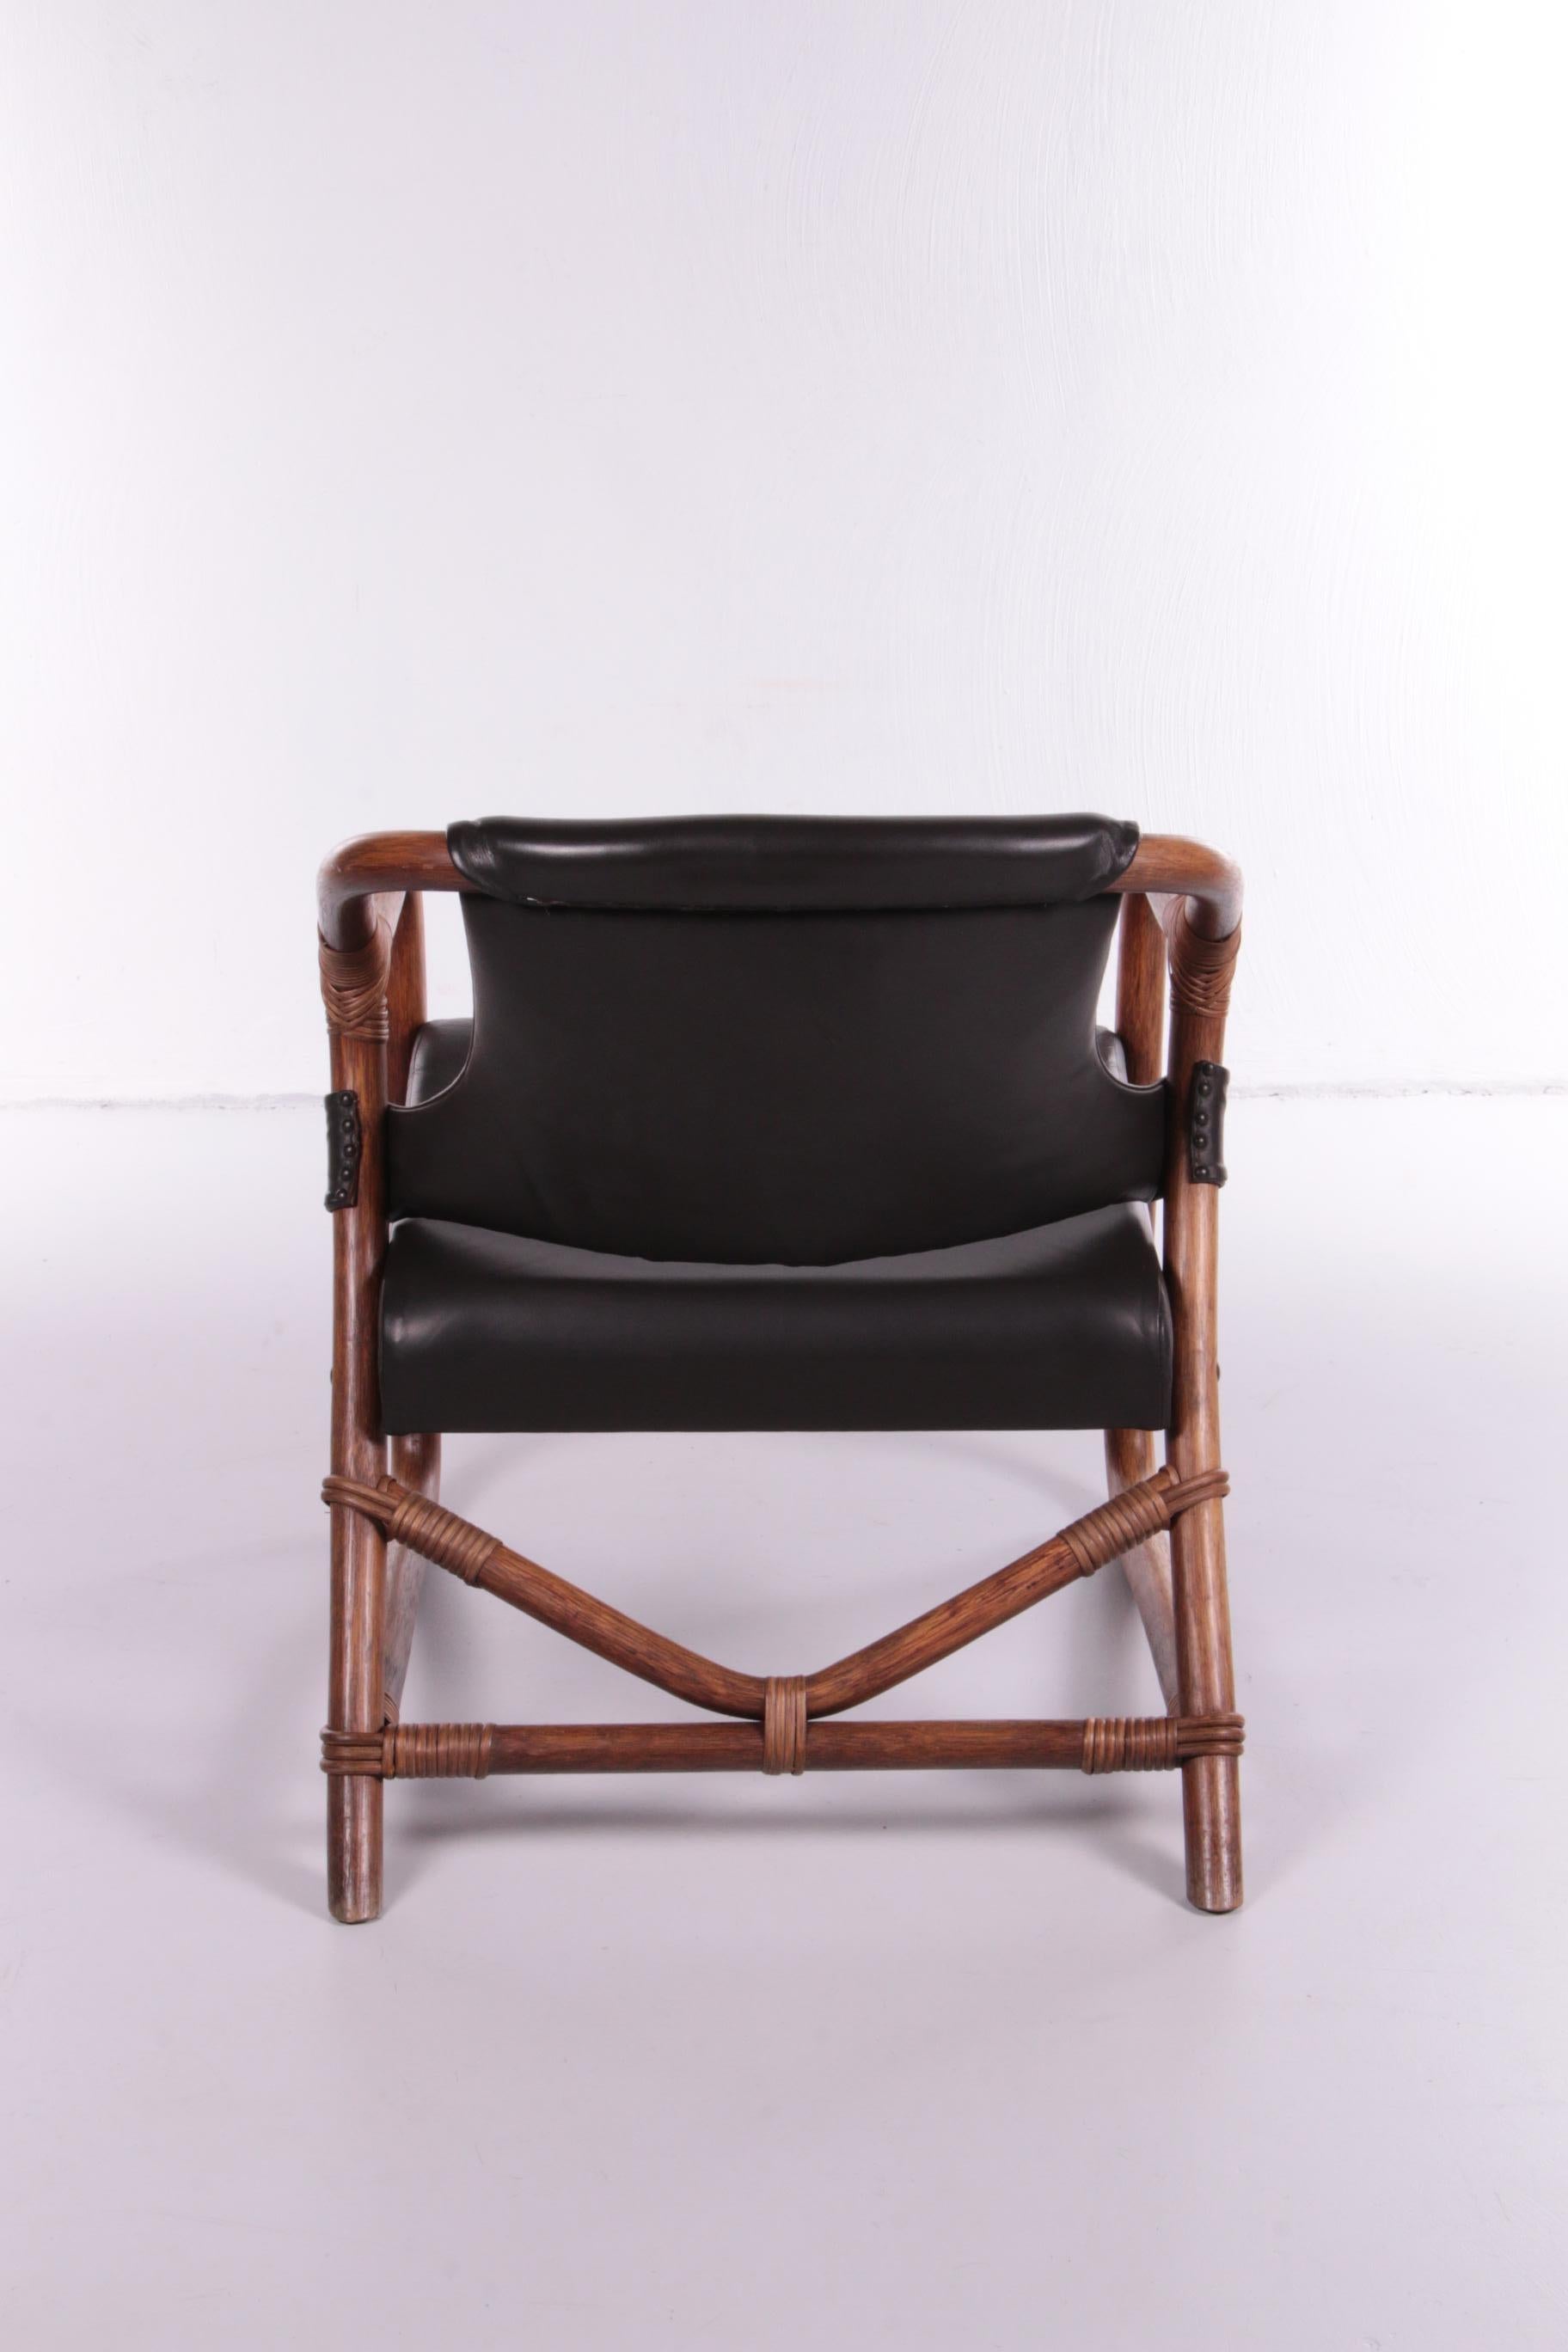 Mid-20th Century French Vintage Bamboo Lounge Set with Black Leather Seat, 1960s